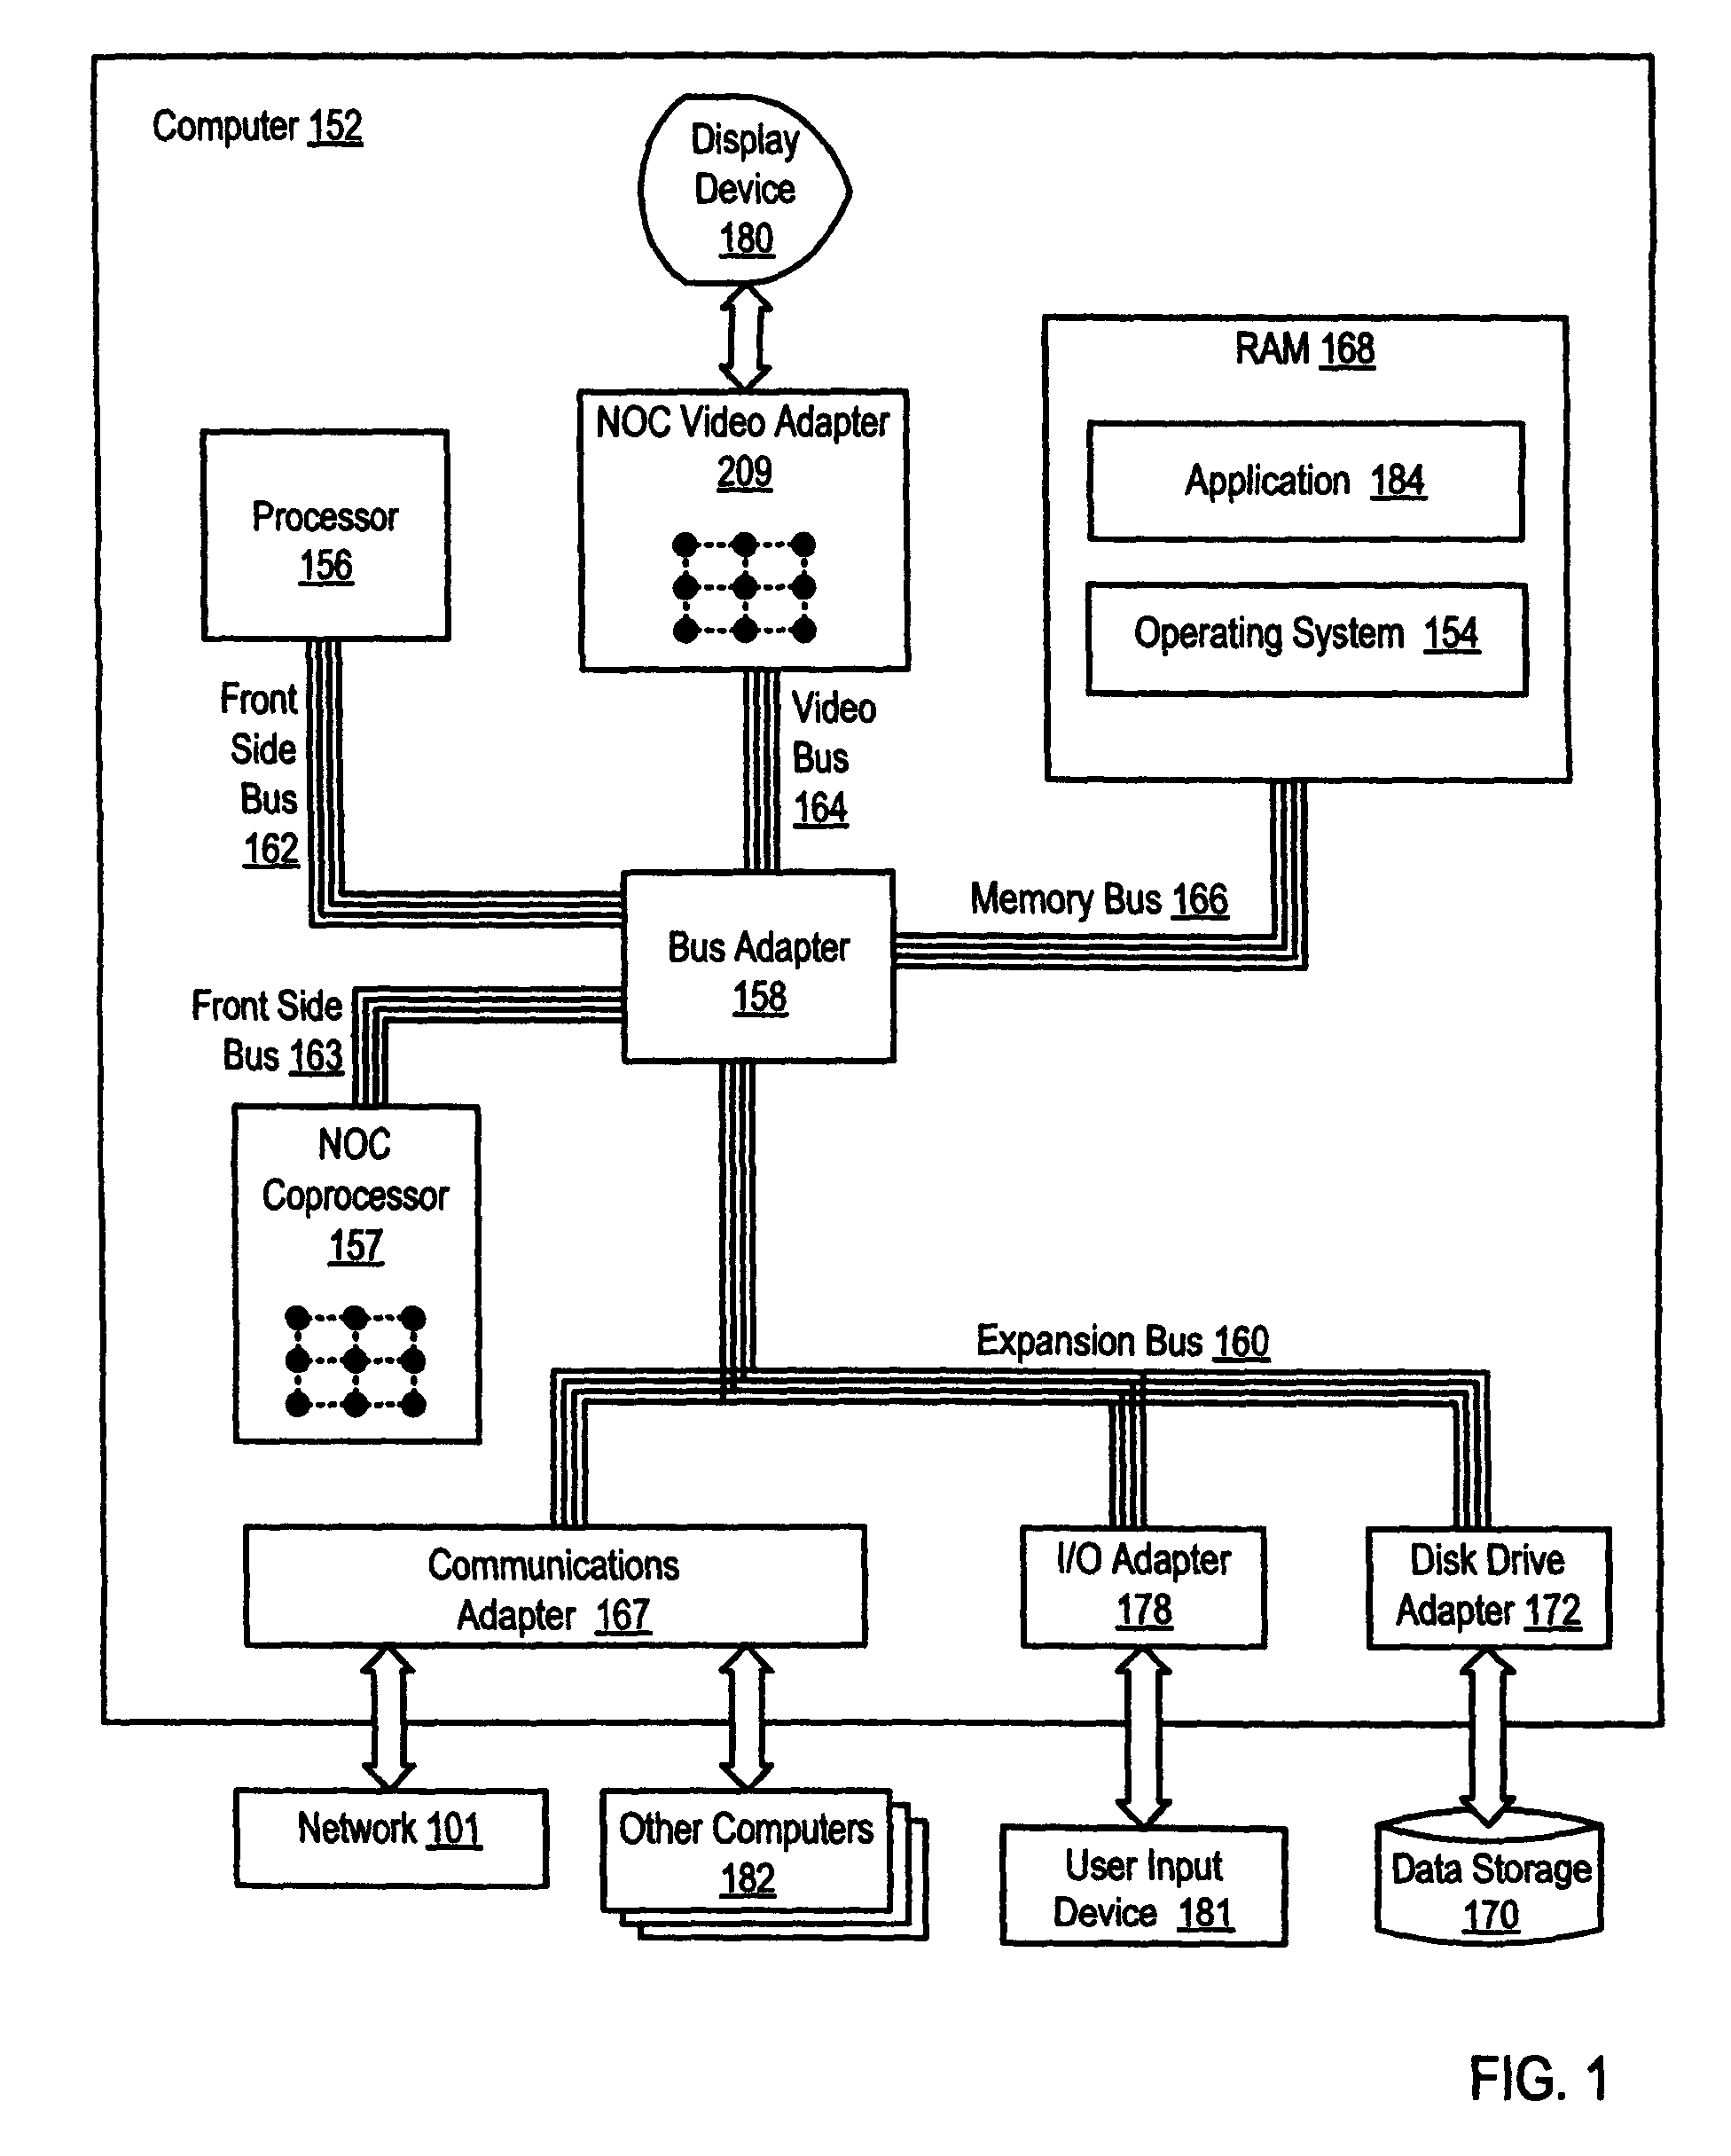 Performance event triggering through direct interthread communication on a network on chip